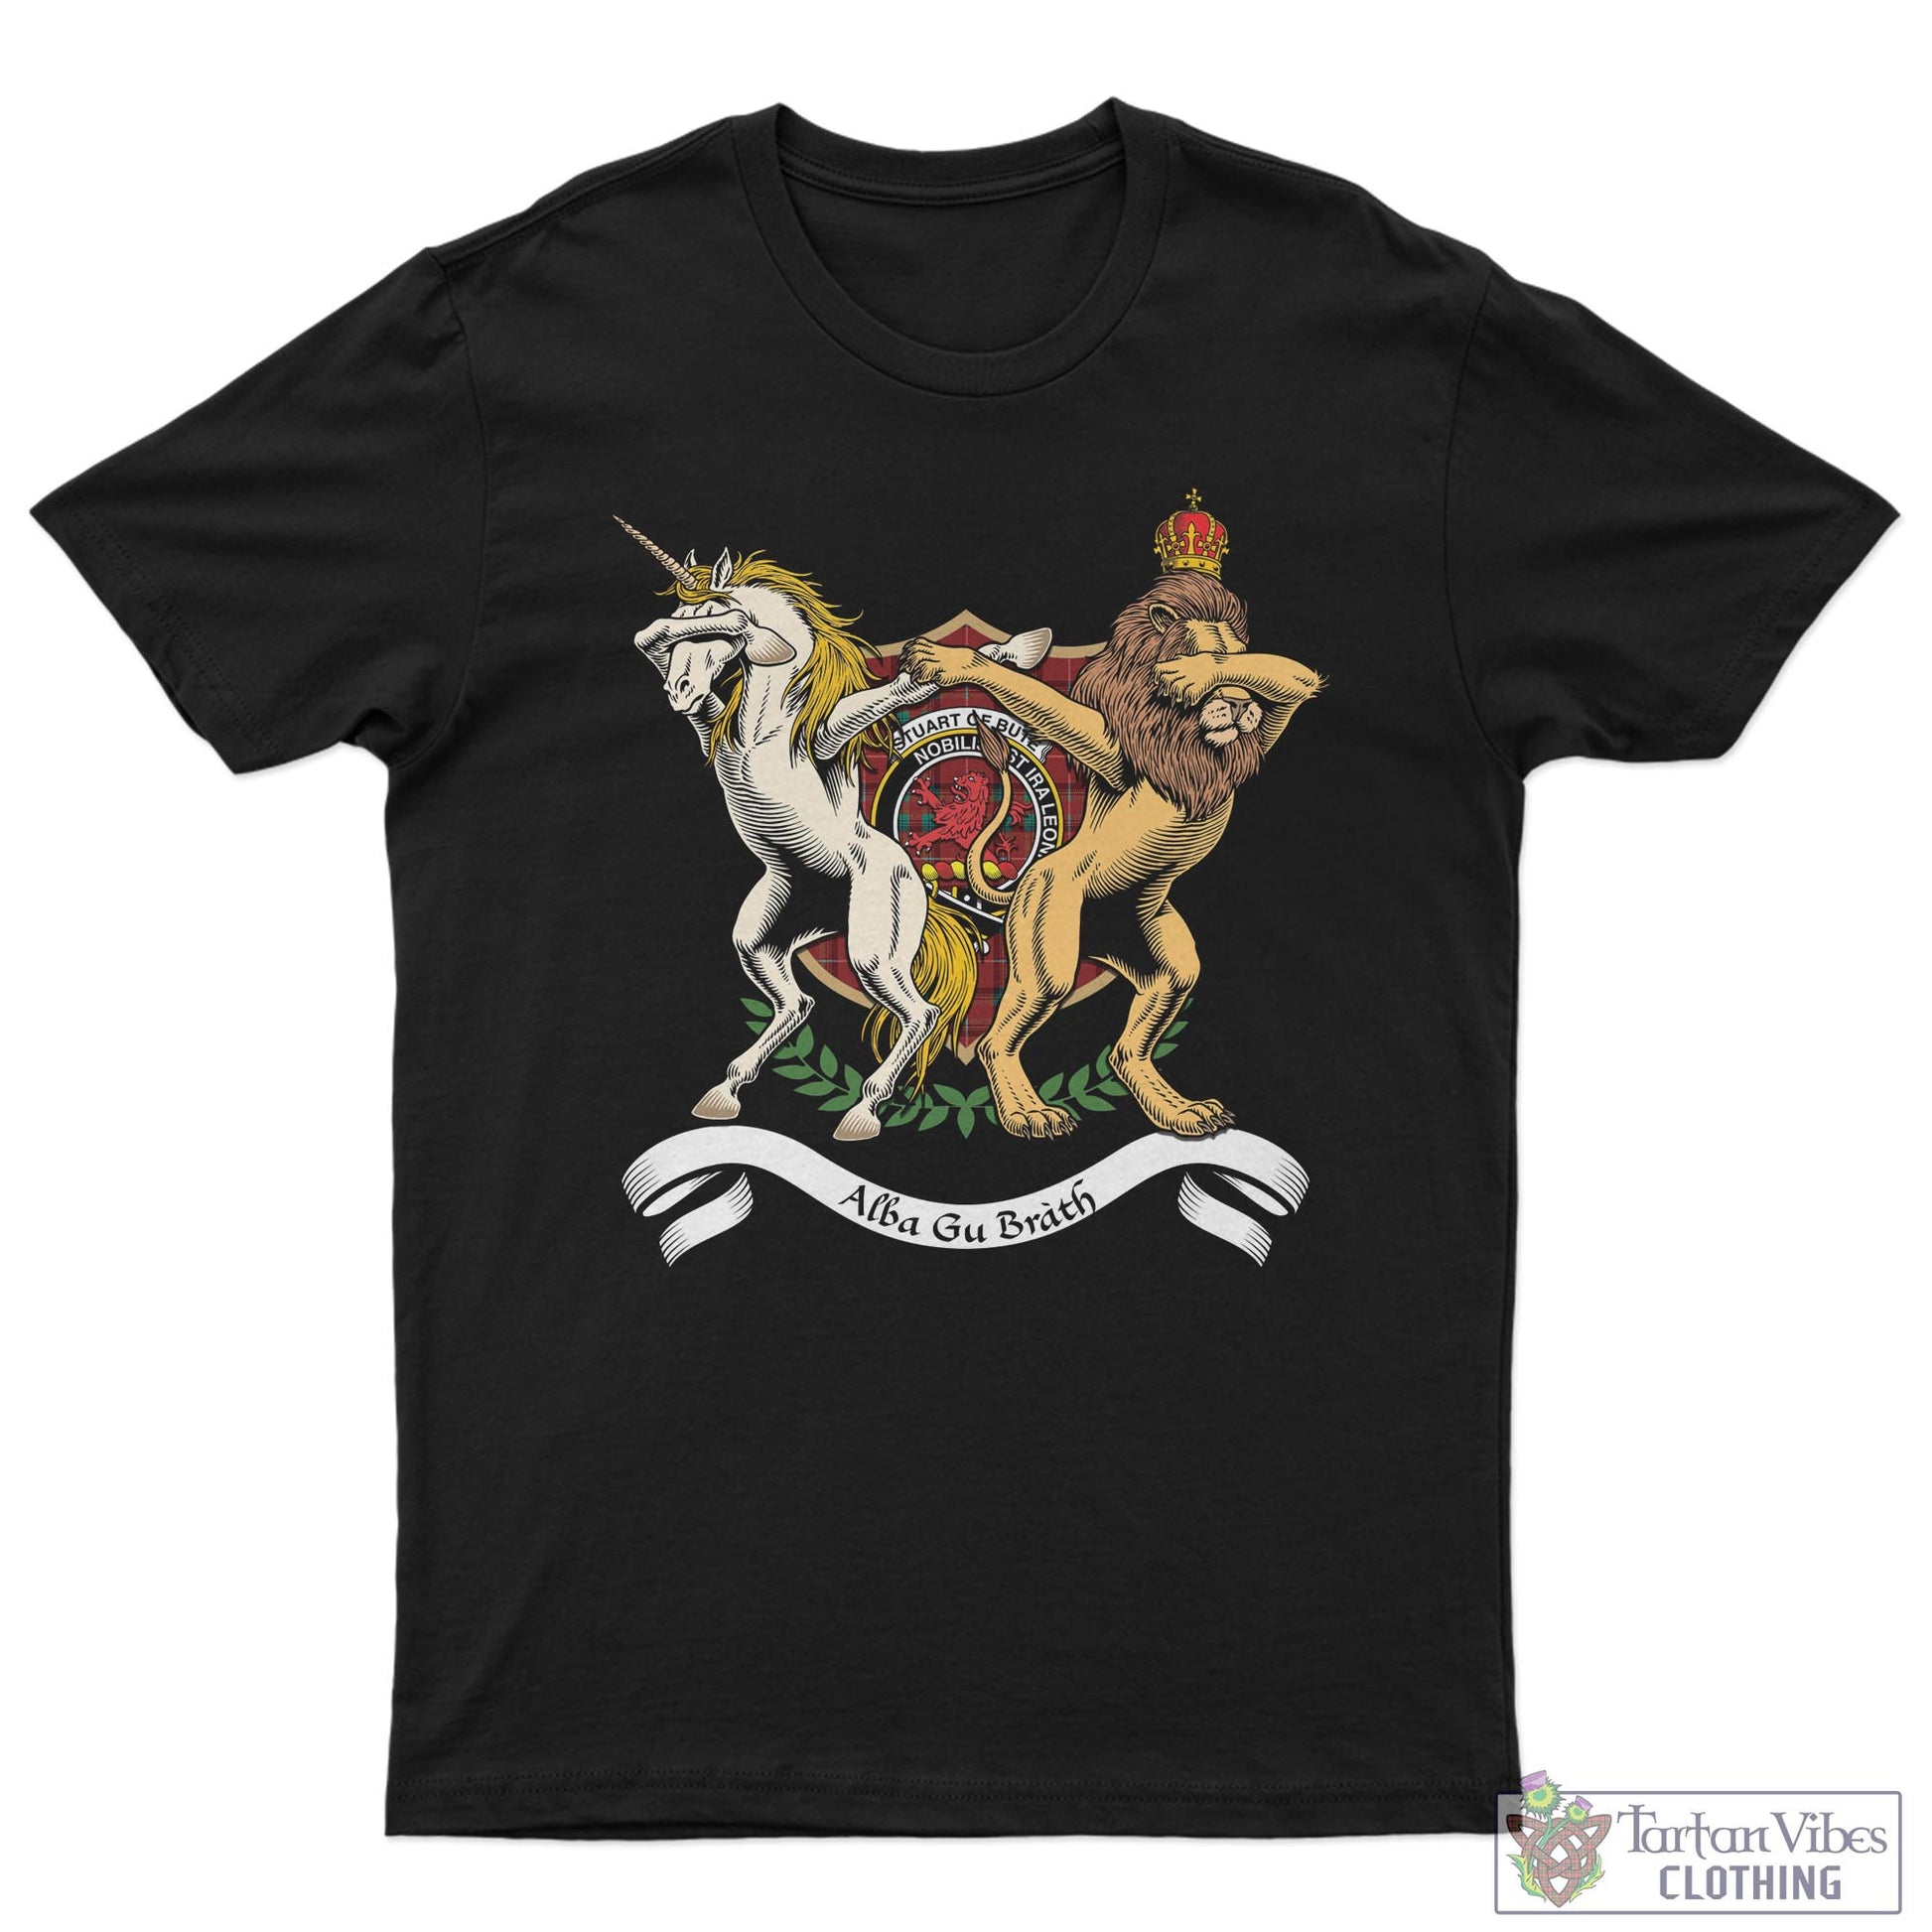 Tartan Vibes Clothing Stuart of Bute Family Crest Cotton Men's T-Shirt with Scotland Royal Coat Of Arm Funny Style